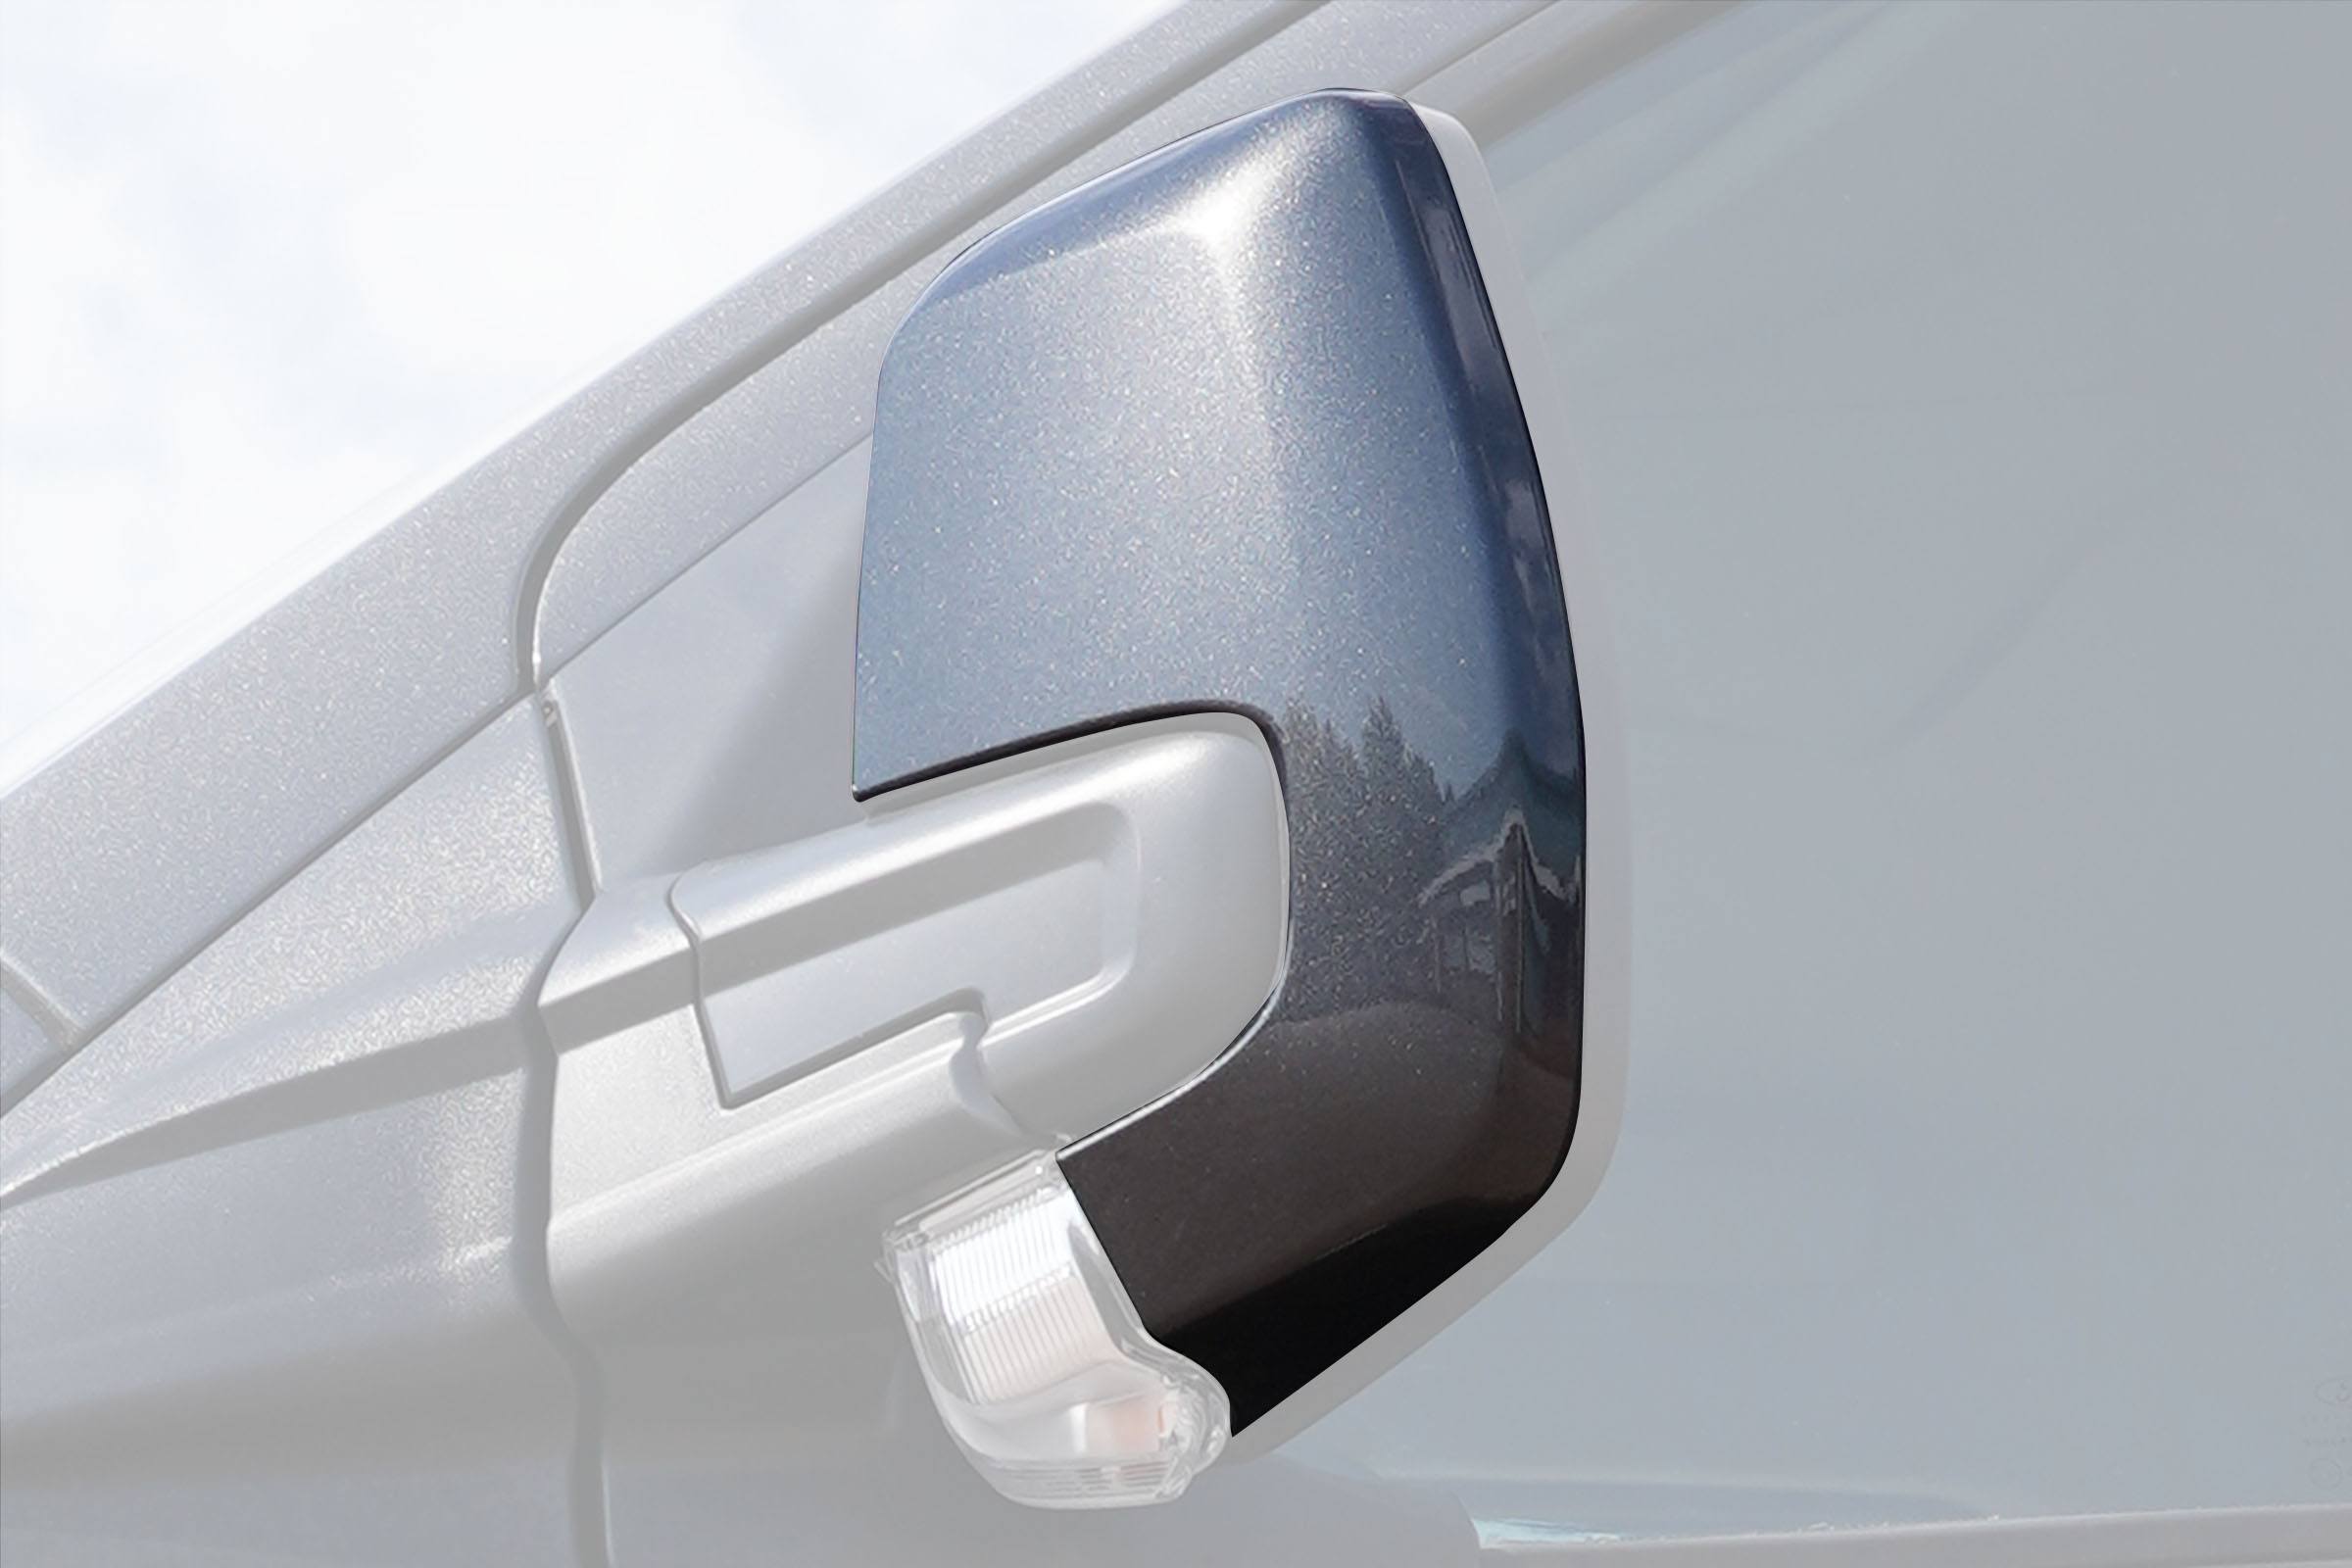 VW Transporter T4 Mirror covers 